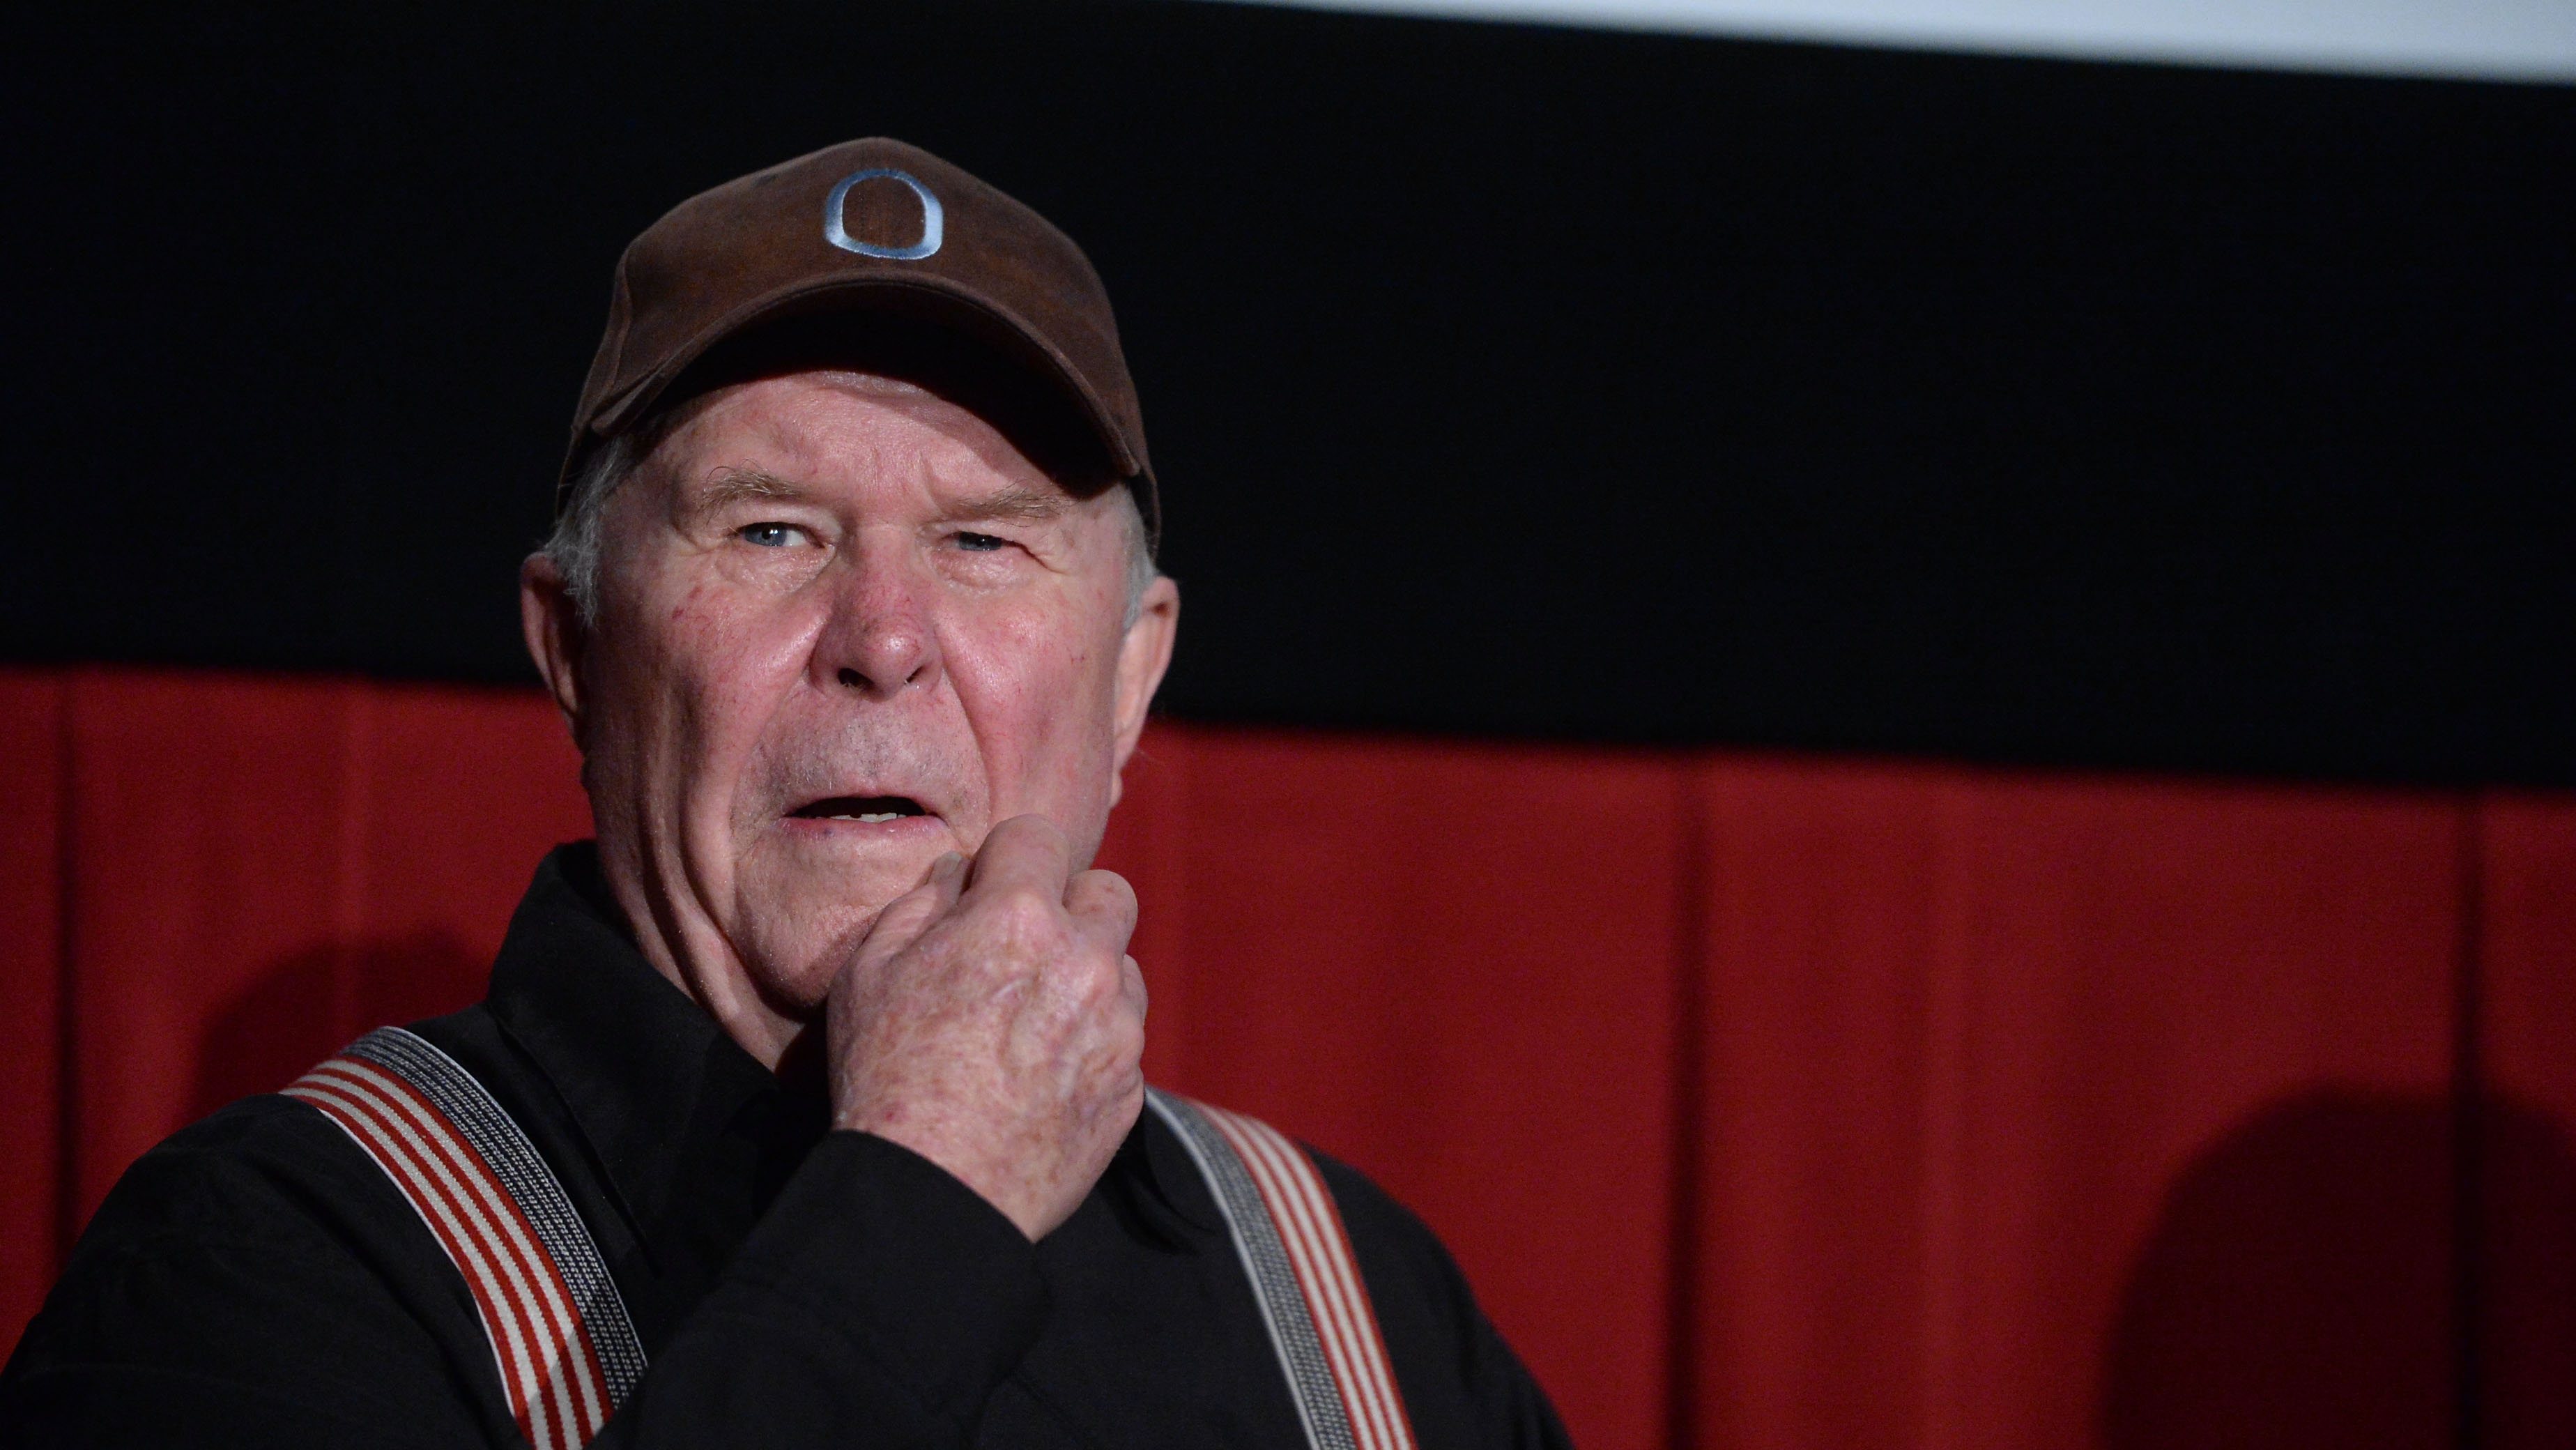 2013 TCM Classic Film Festival - &quot;Deliverance&quot; Reunion Featuring Appearances By John Voigt, Burt Reynolds, Ned Beatty and Director John Boorman